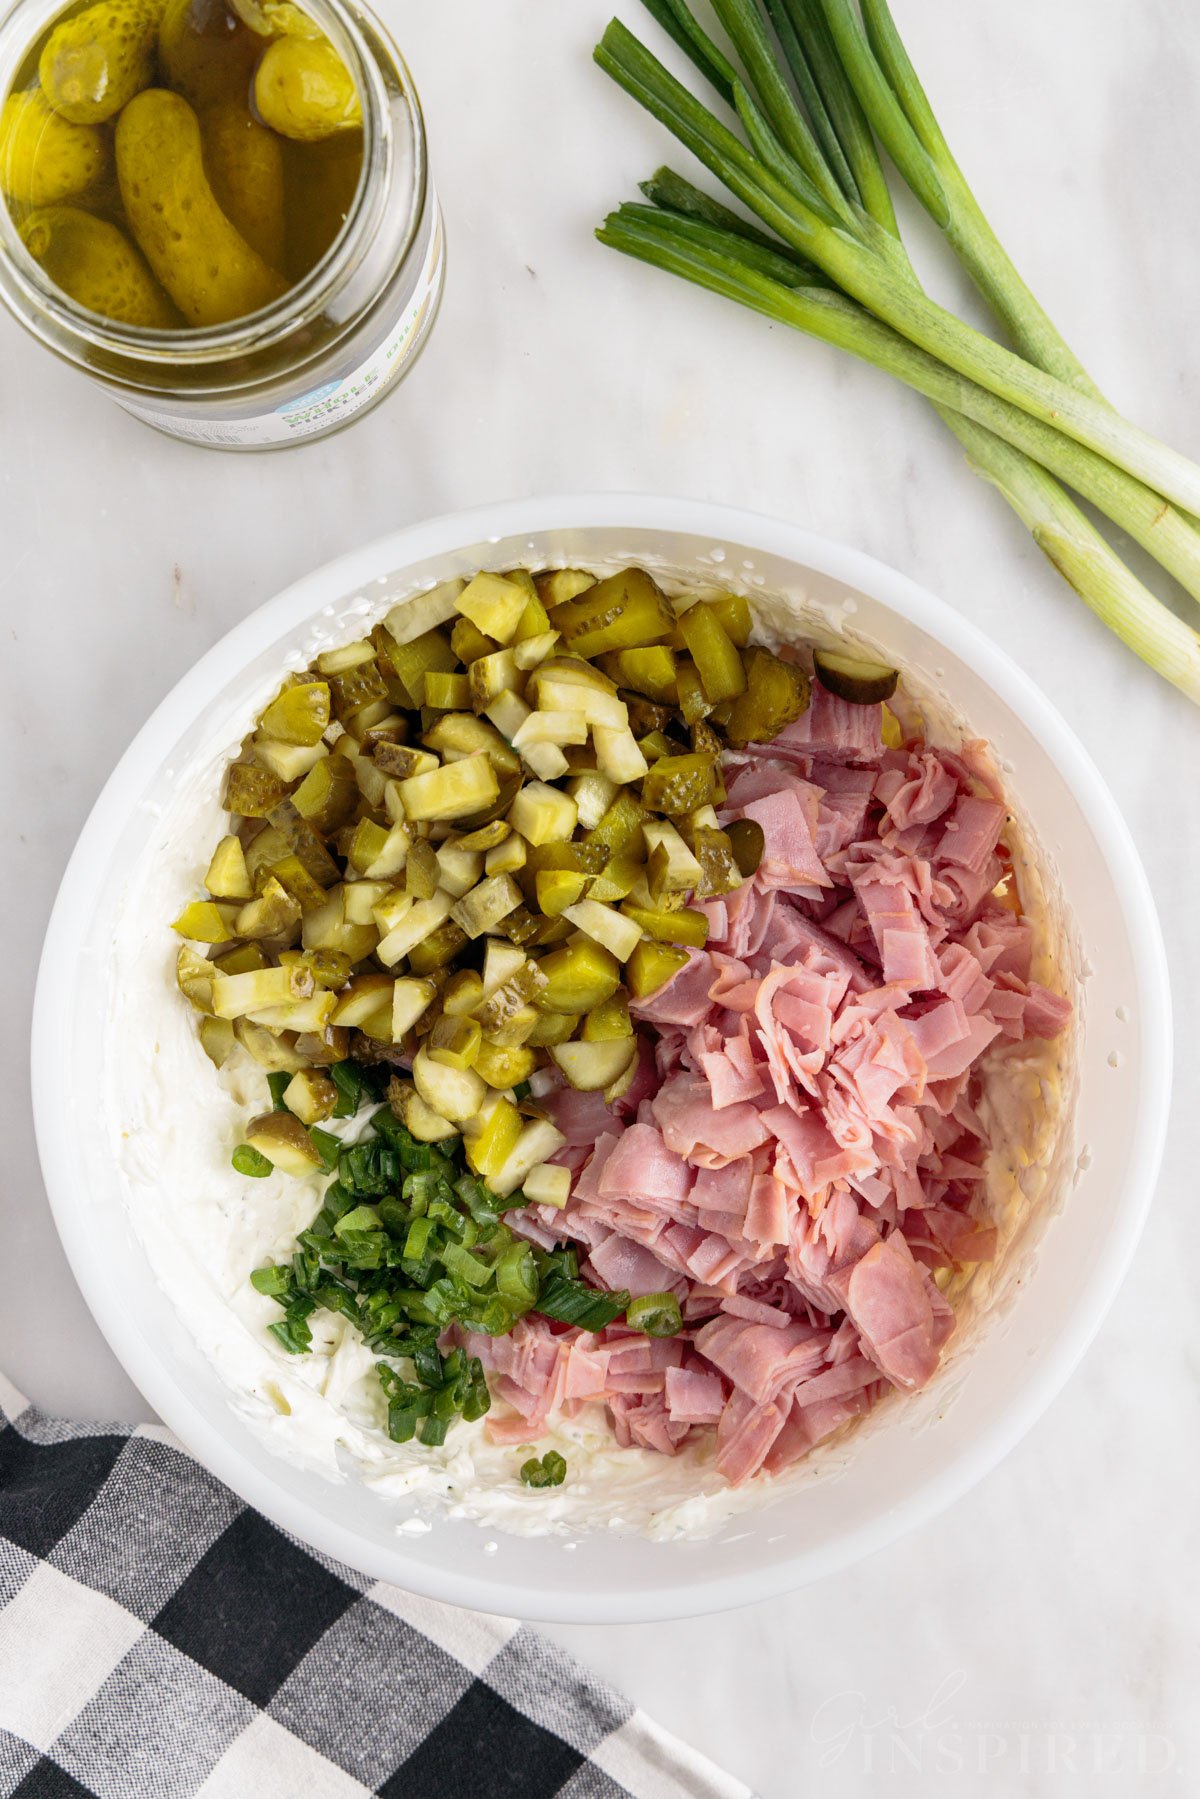 Chopped ham, chopped dill pickles, and green onions piled in bowl with cream cheese mixture.